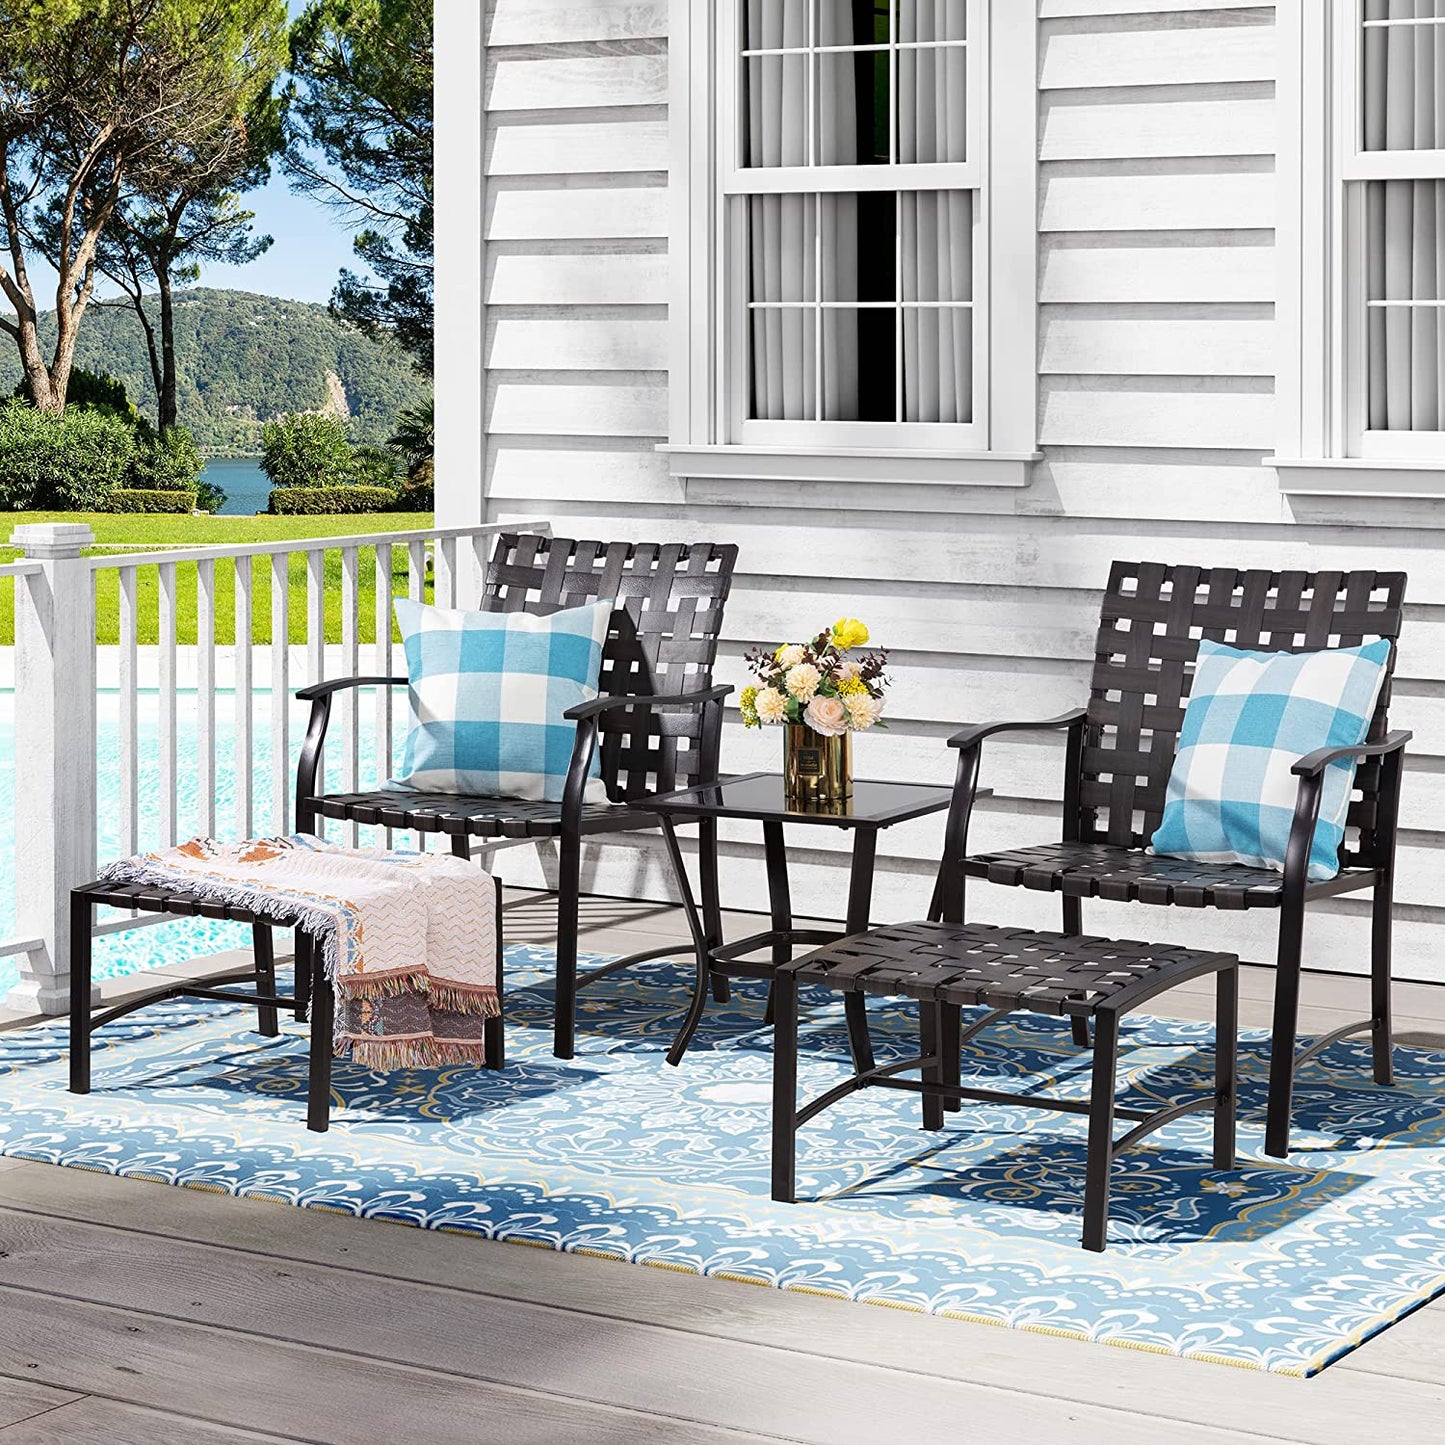 5 Piece Patio Conversation Set Lounge Chair Sofa, Patio Dining Chair Wicker furniture set with glass coffee table (US spot) | Decor Gifts and More